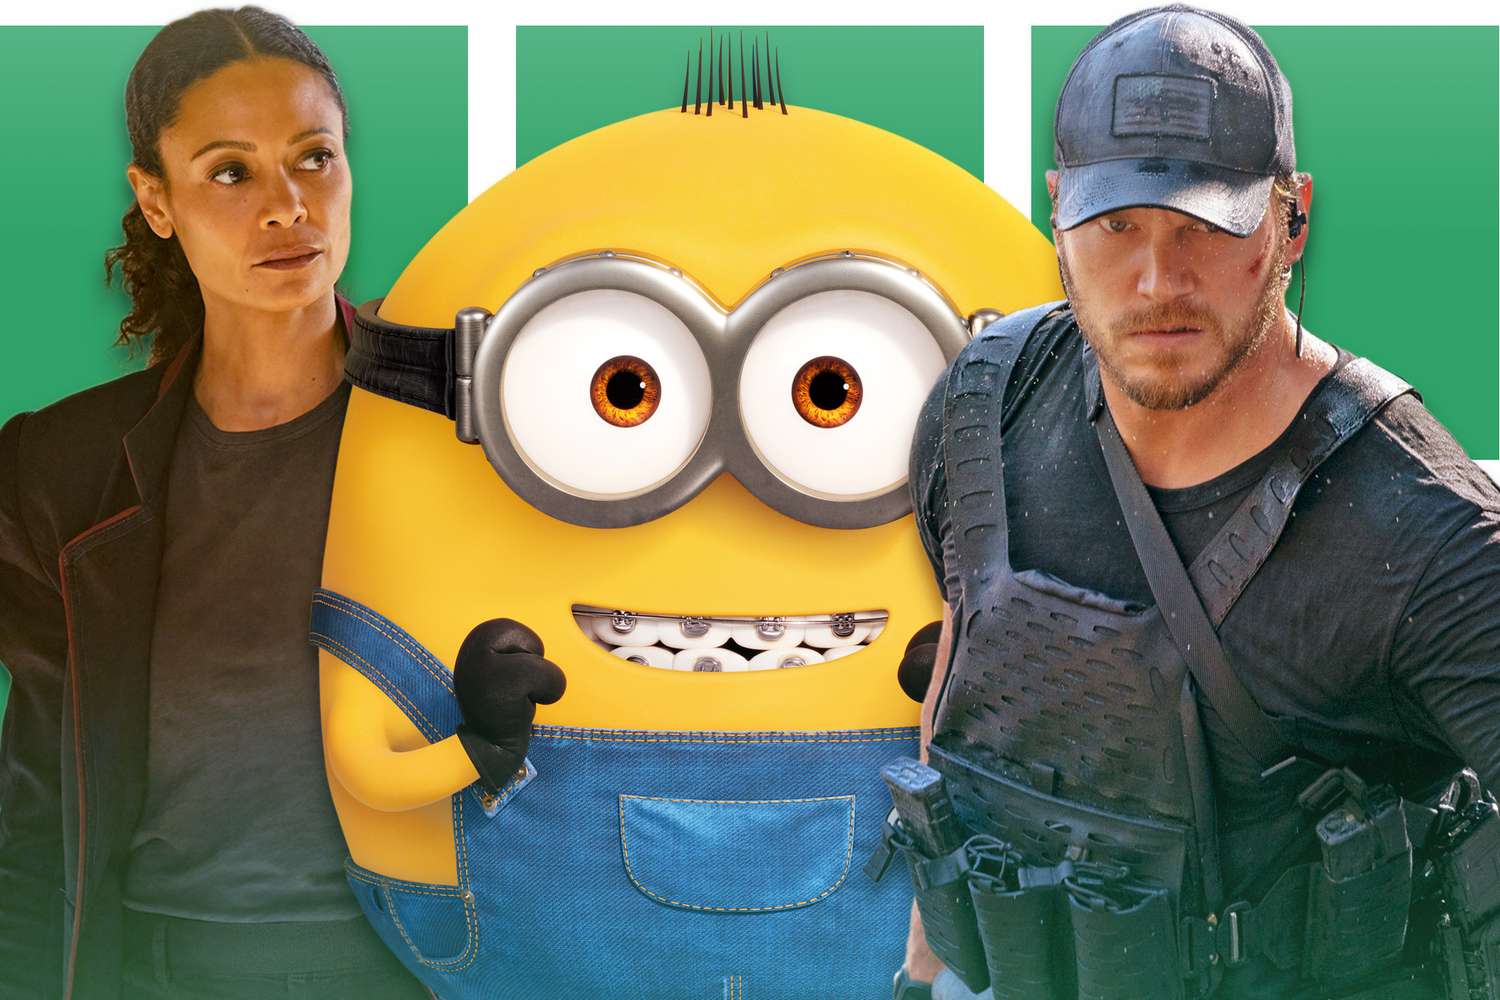 Minion (from the new Gru movie), Chris Pratt from The Terminal List, and Thandiwe Newton from Westworld